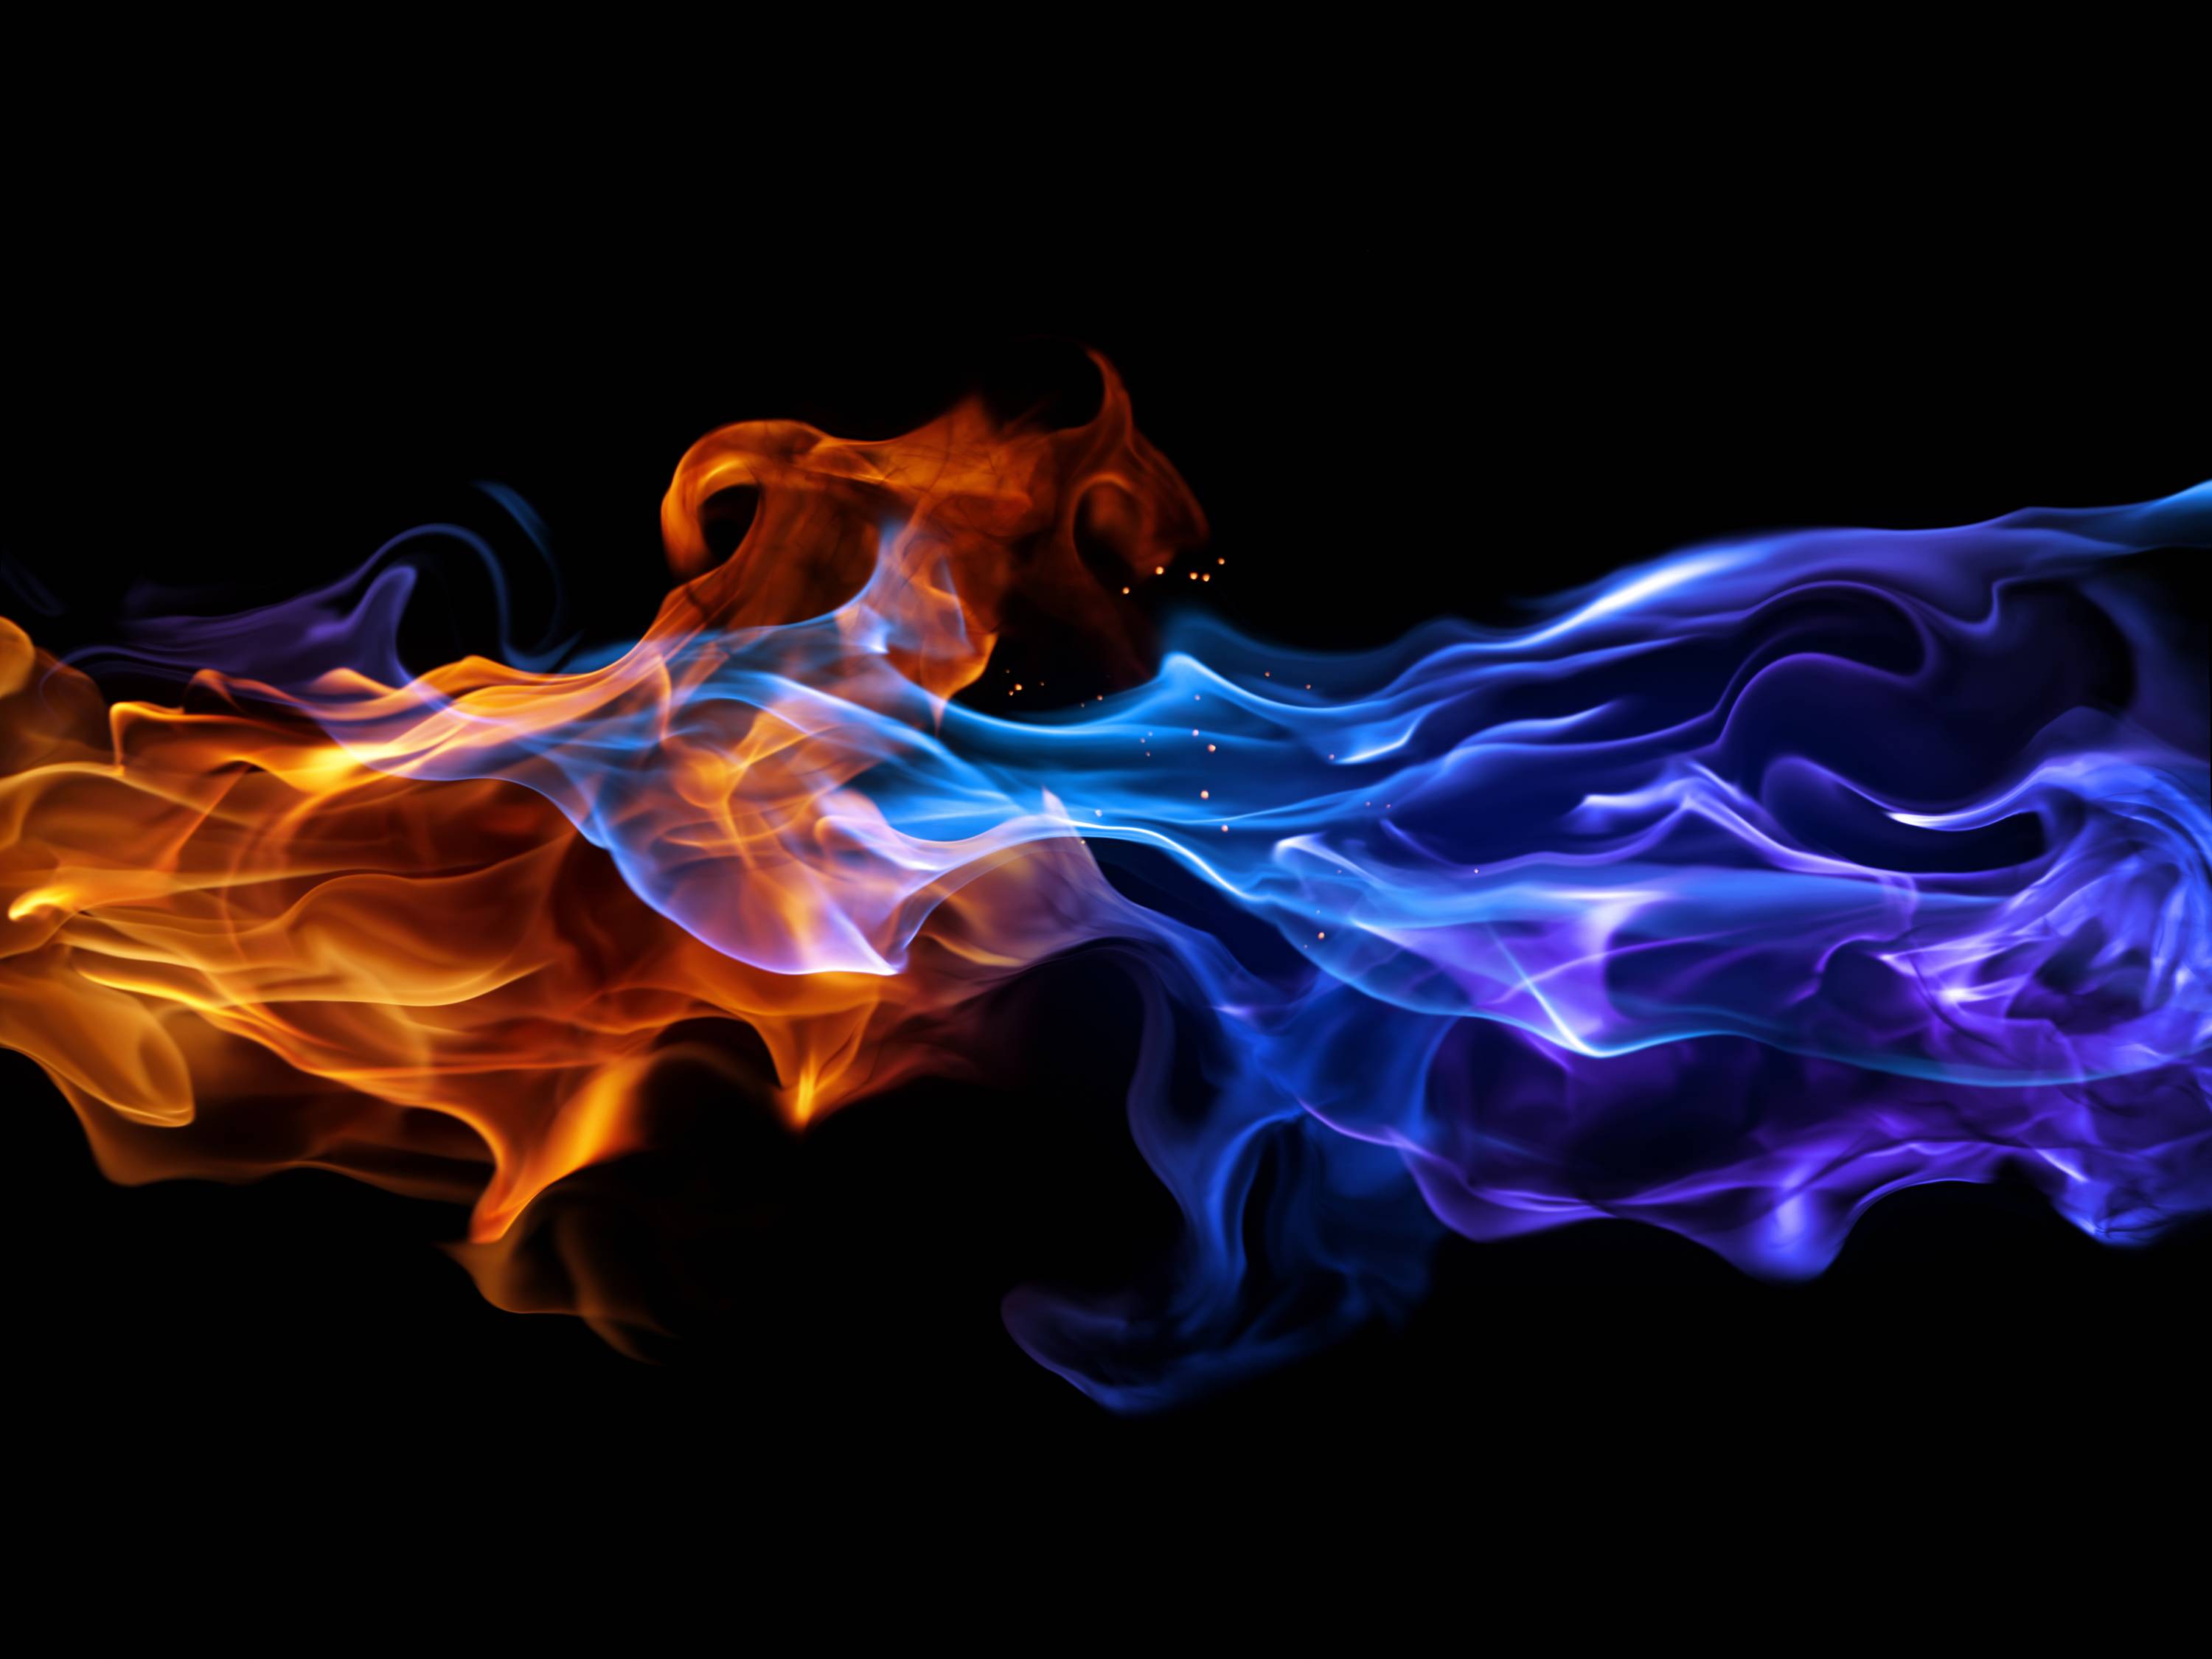 Blue Fire Wallpaper Image Amp Pictures Becuo